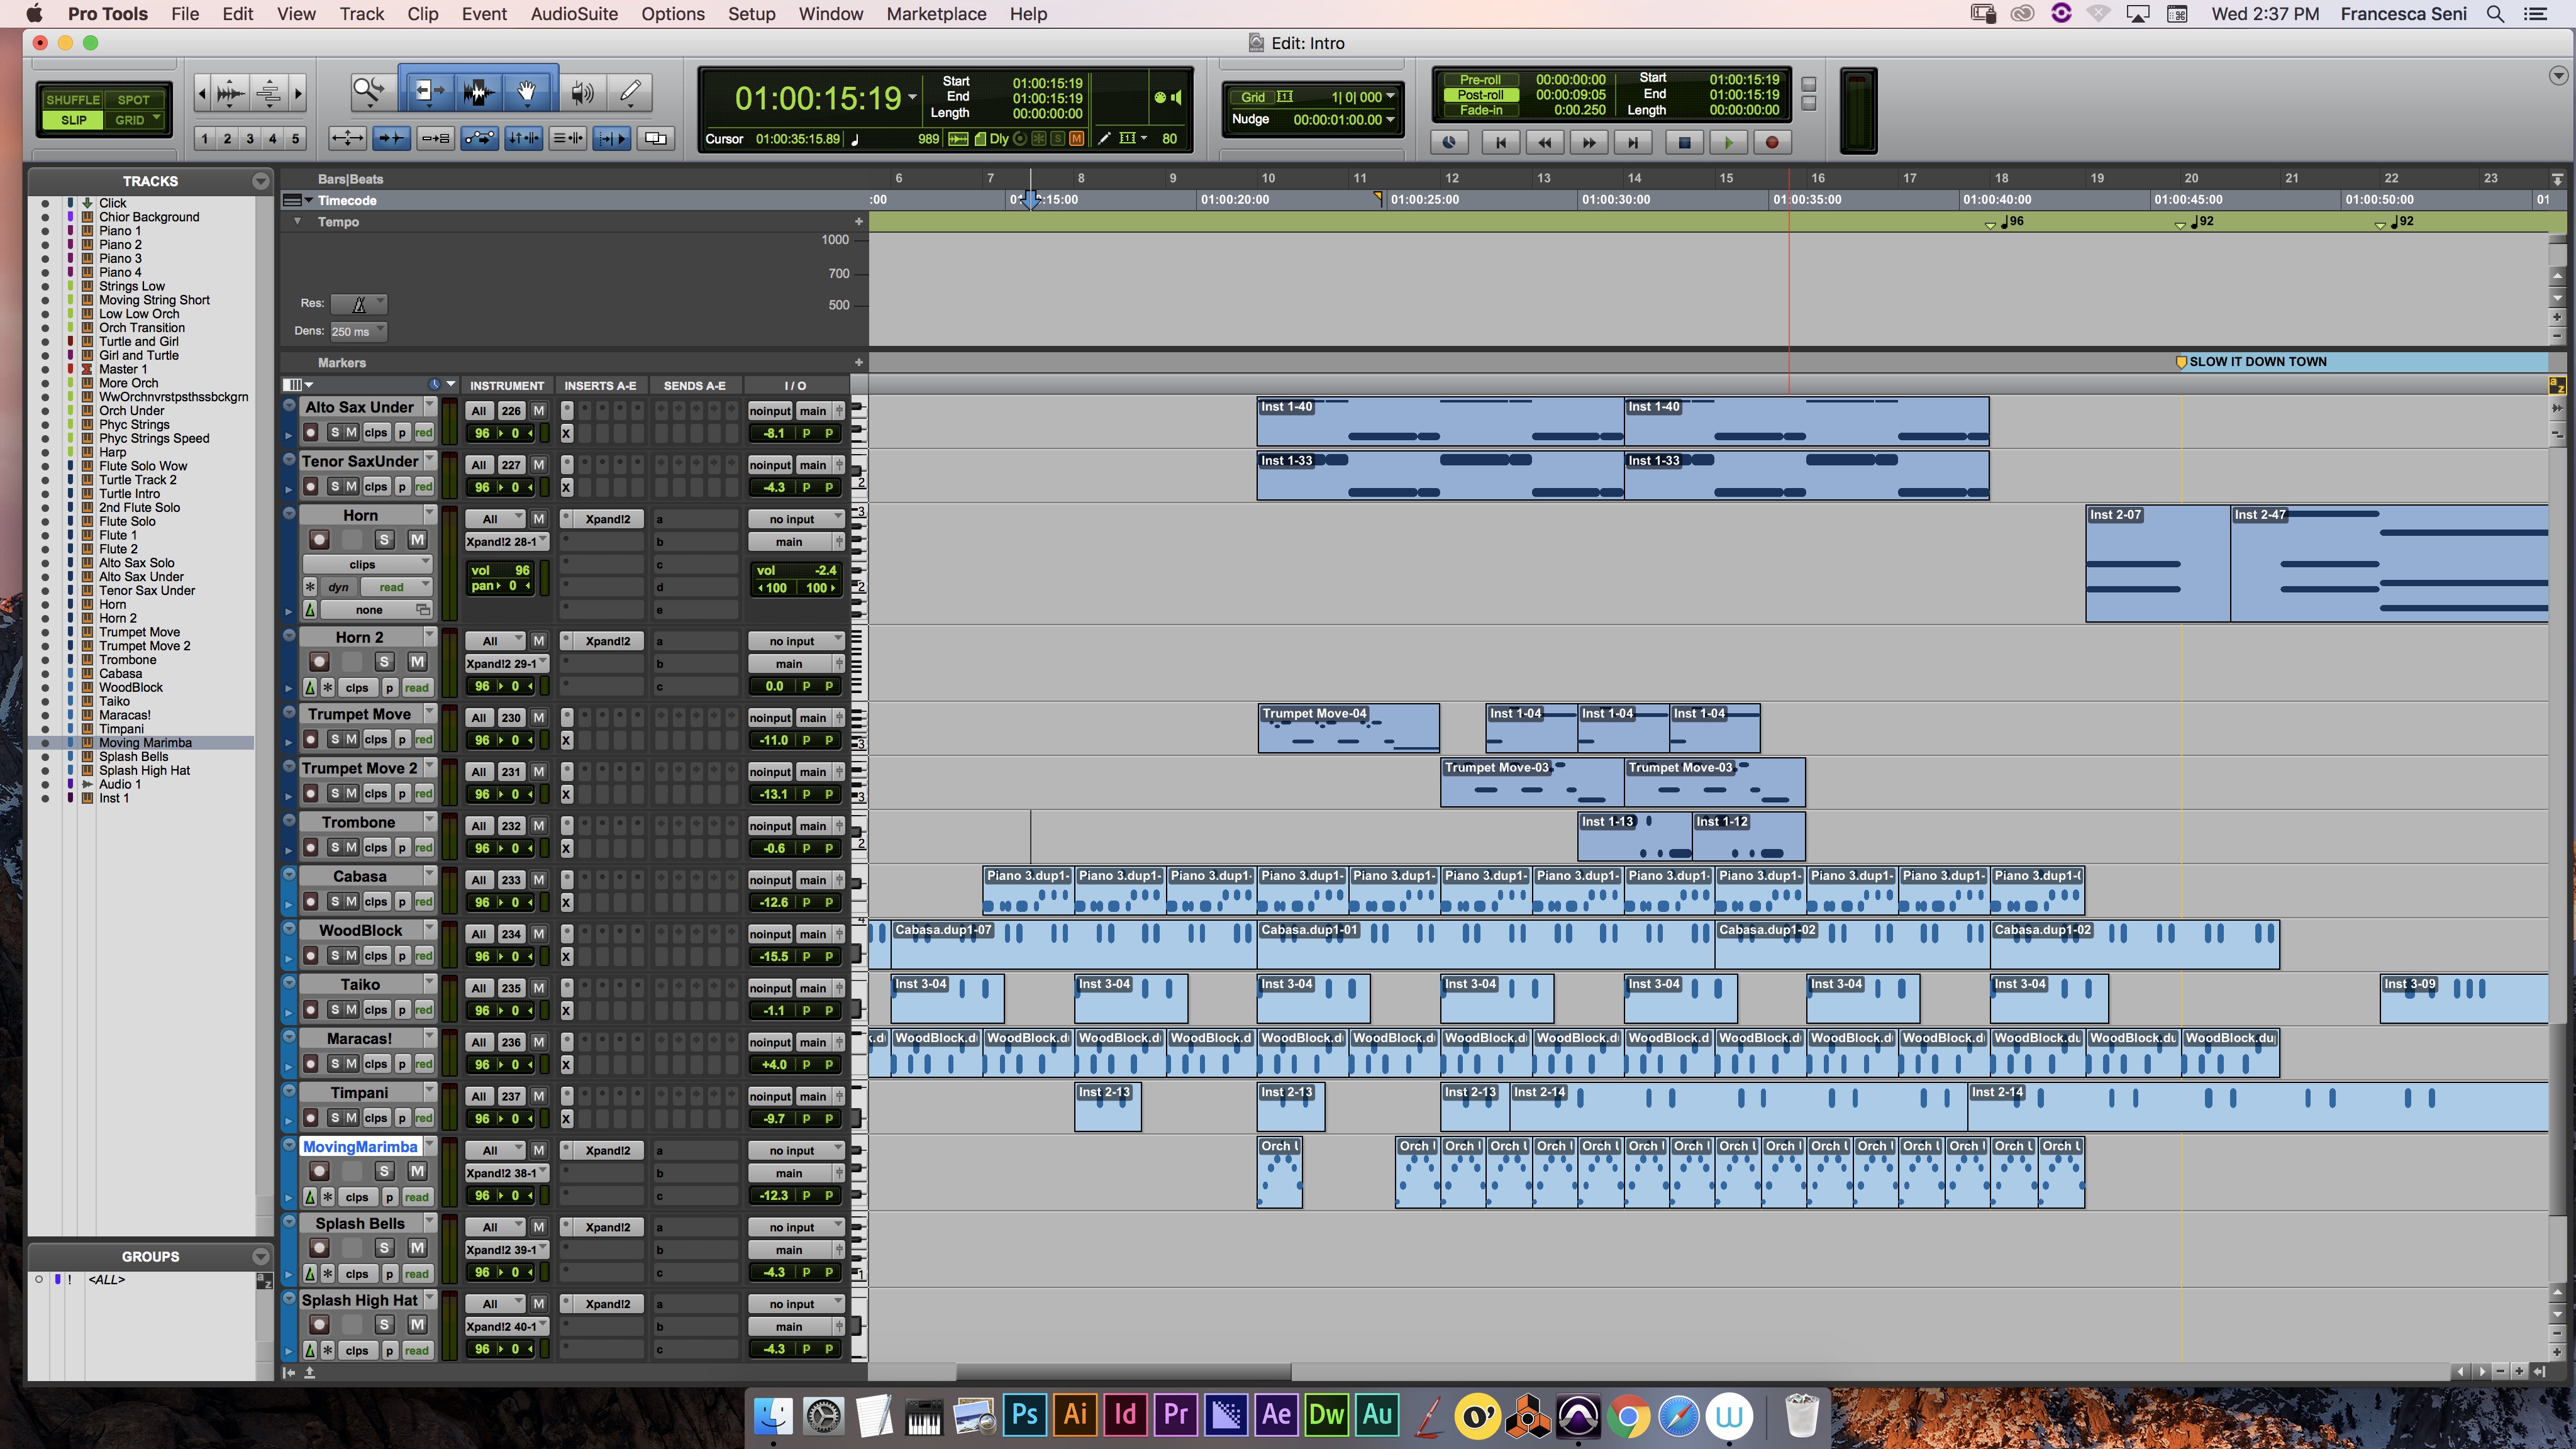 This is a screenshot of Pro Tools which I used to produce my Flash Fiction soundtrack